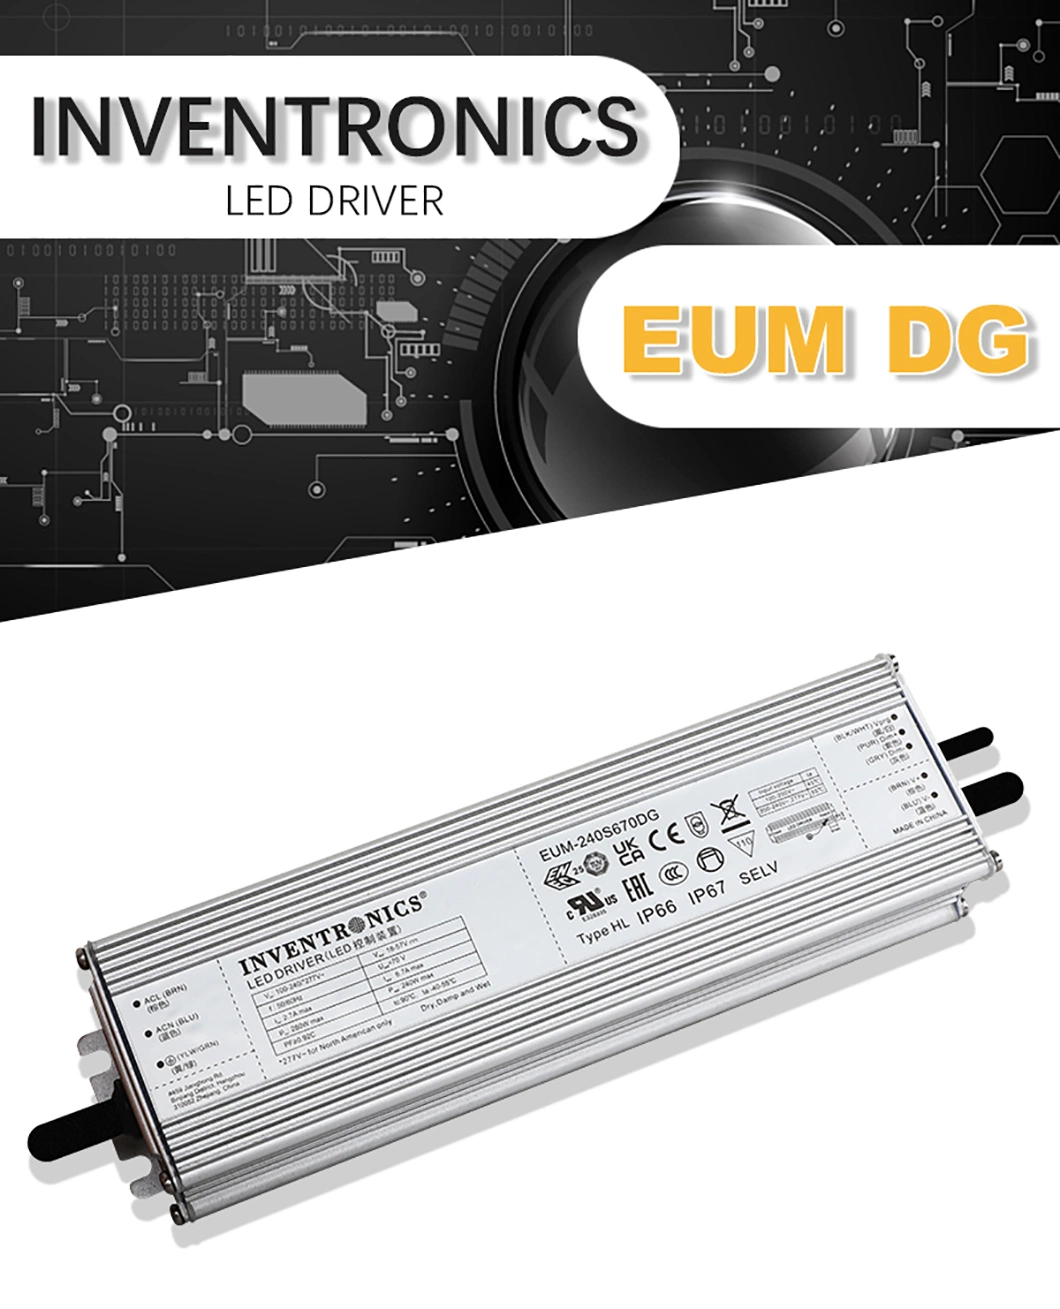 50W Constant Power Inventronics Dimmable LED Driver